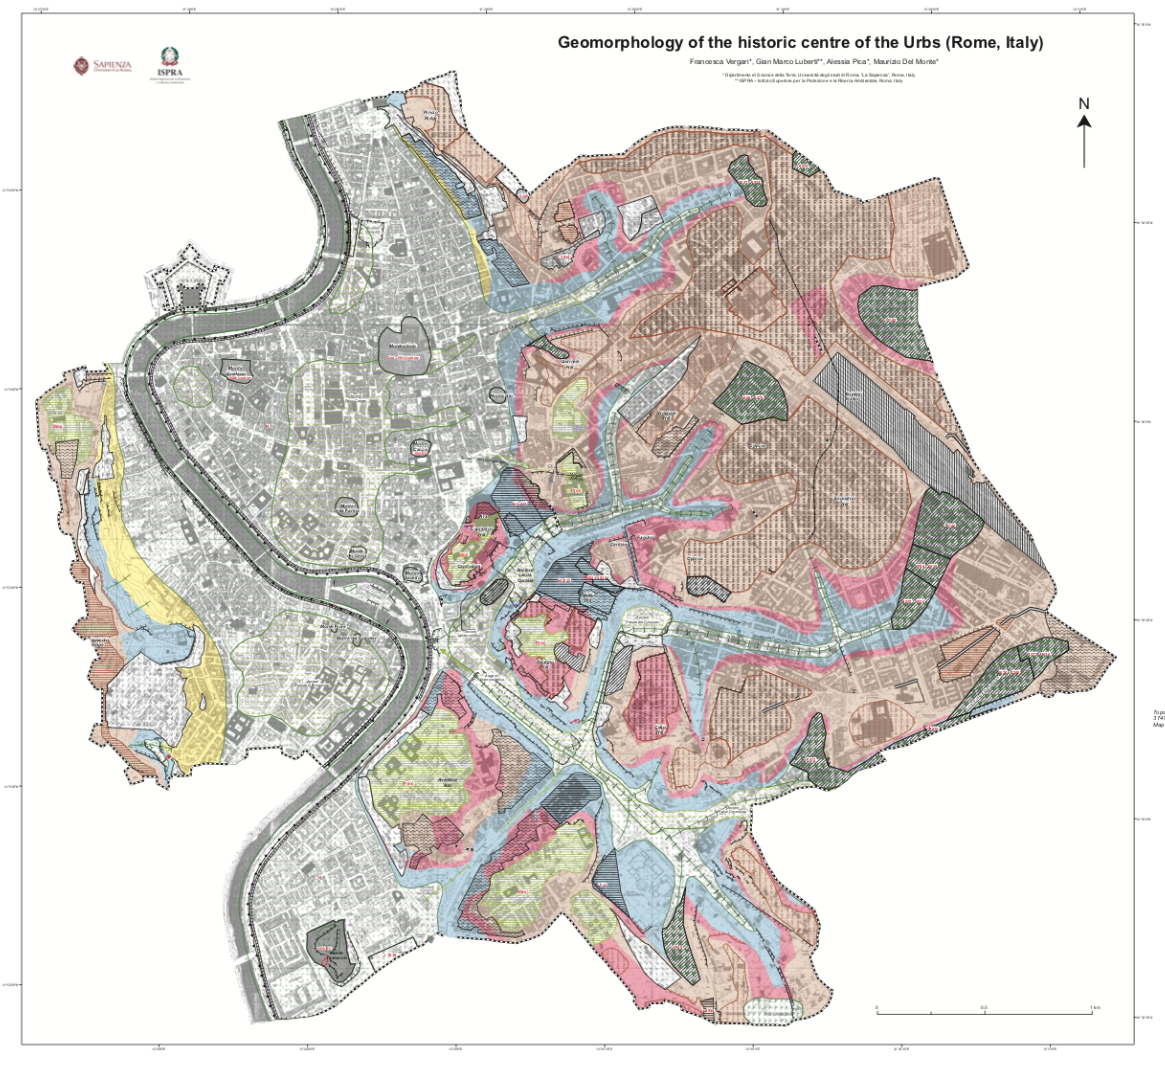 city of rome as a geomorphic map reproduced from Vergari et al. 2020